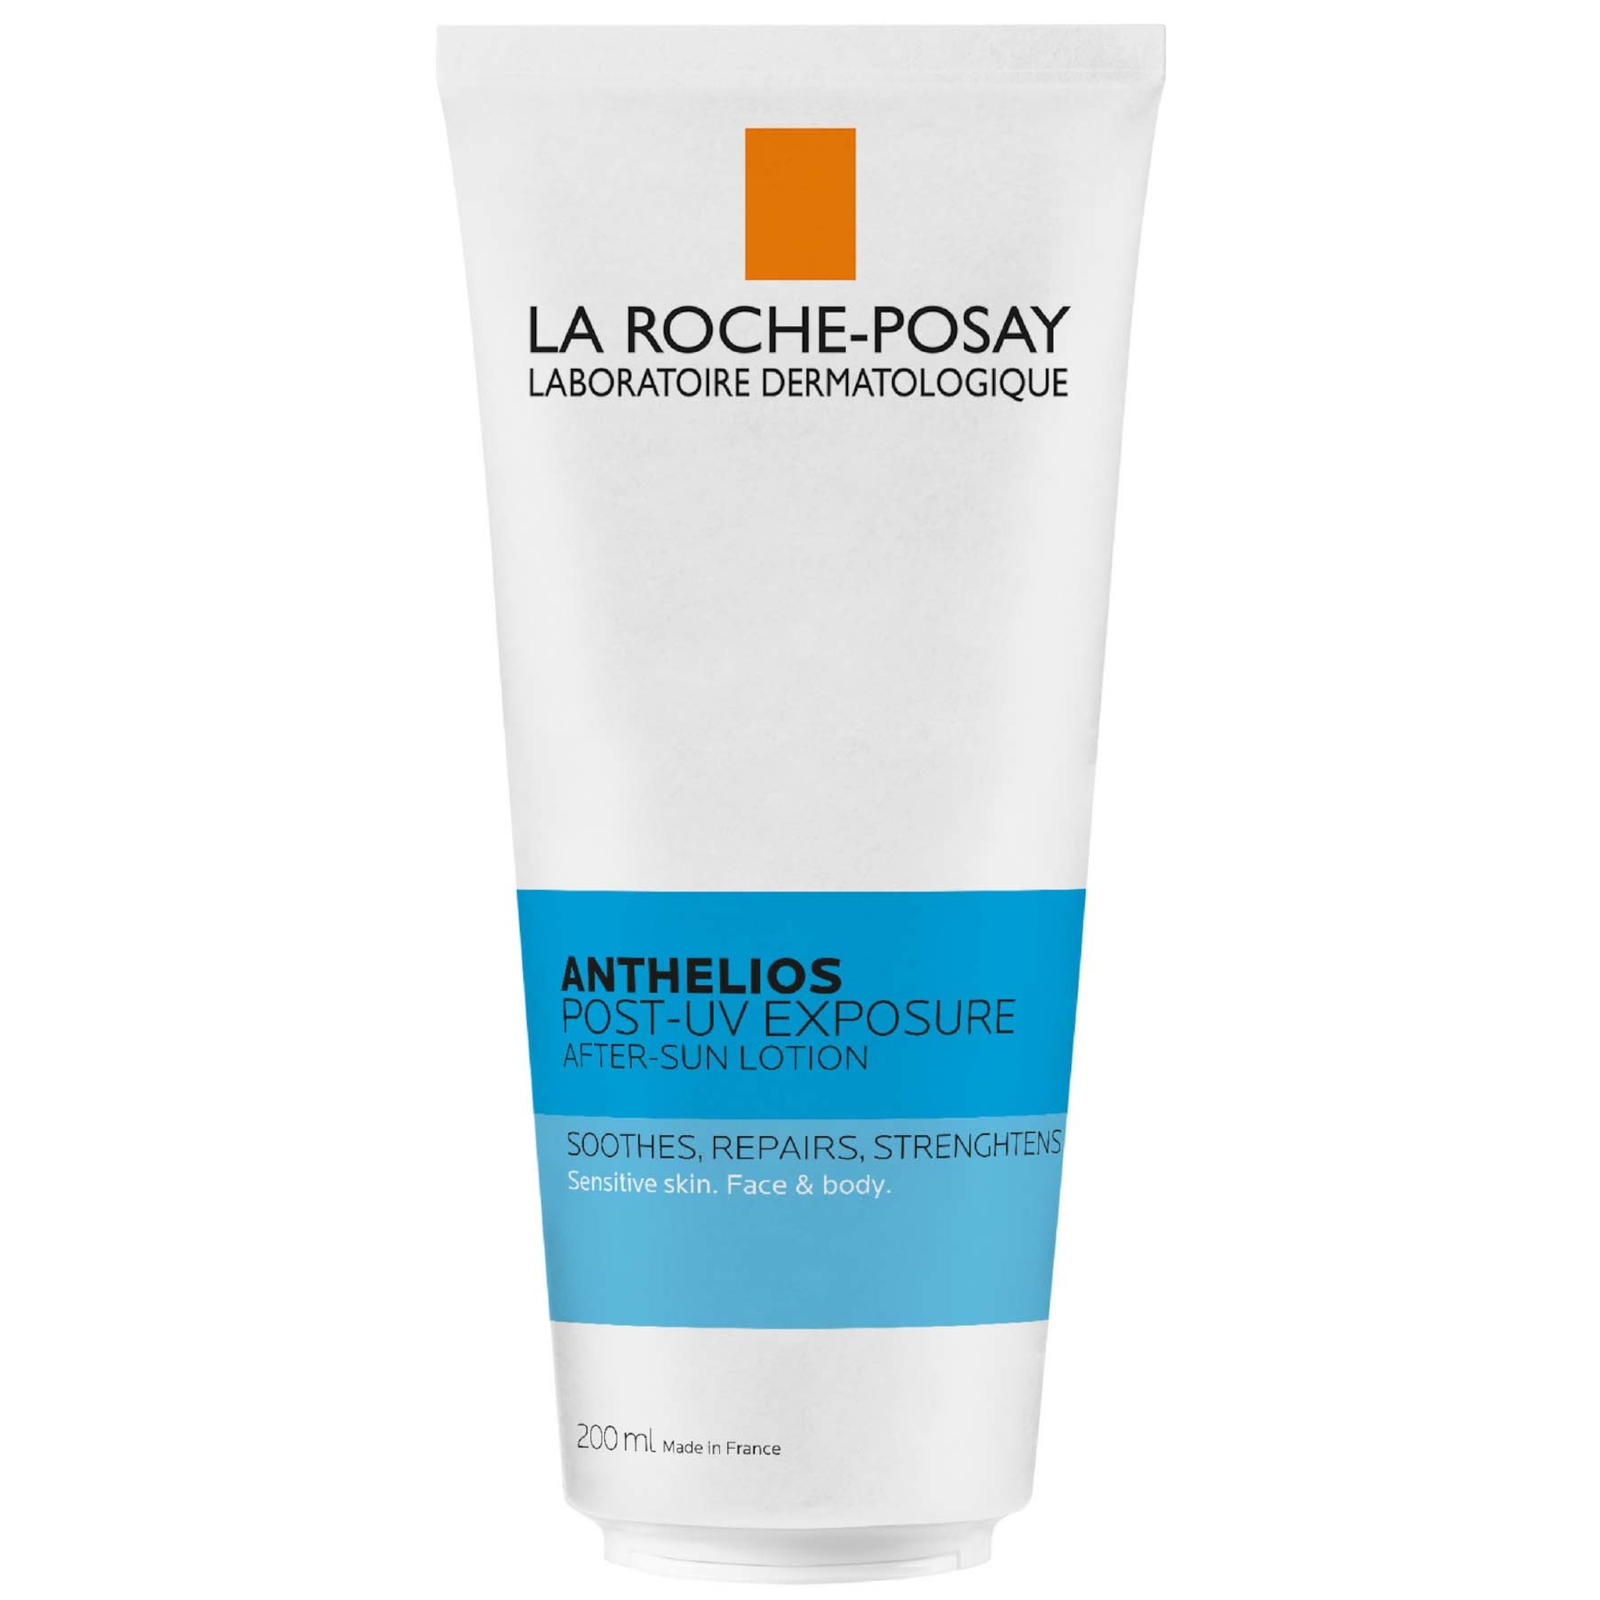 Shop La Roche-posay Anthelios Post Uv Exposure After Sun Lotion 200ml